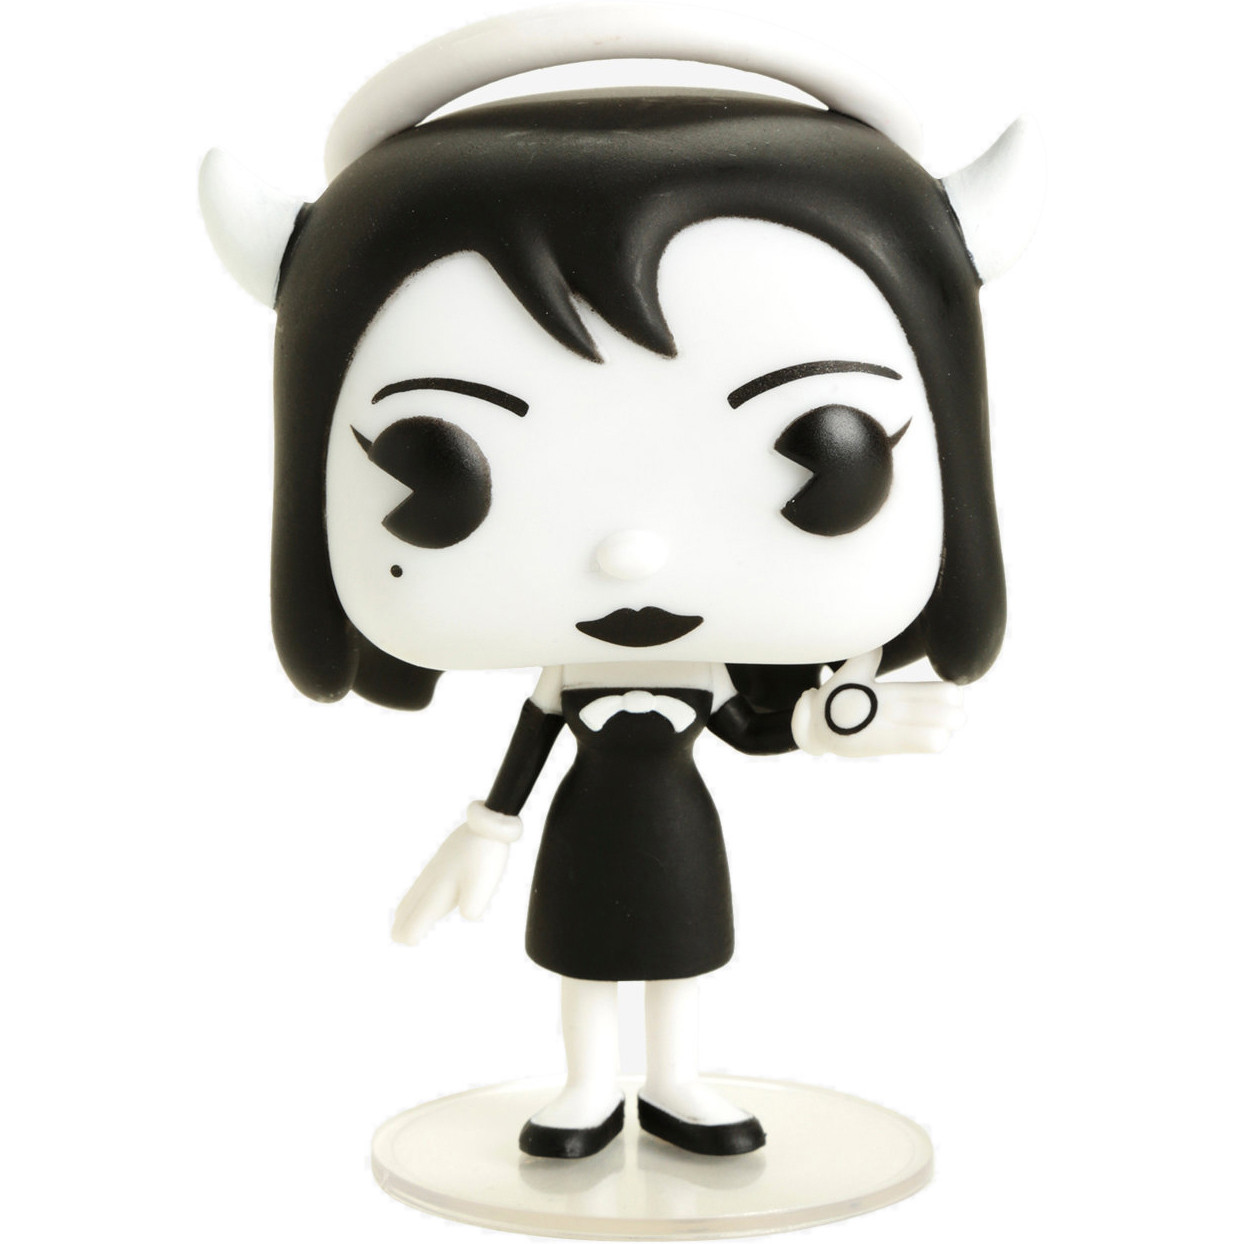 Funko Pop Bendy and the Ink Machine Checklist, Gallery, Exclusives